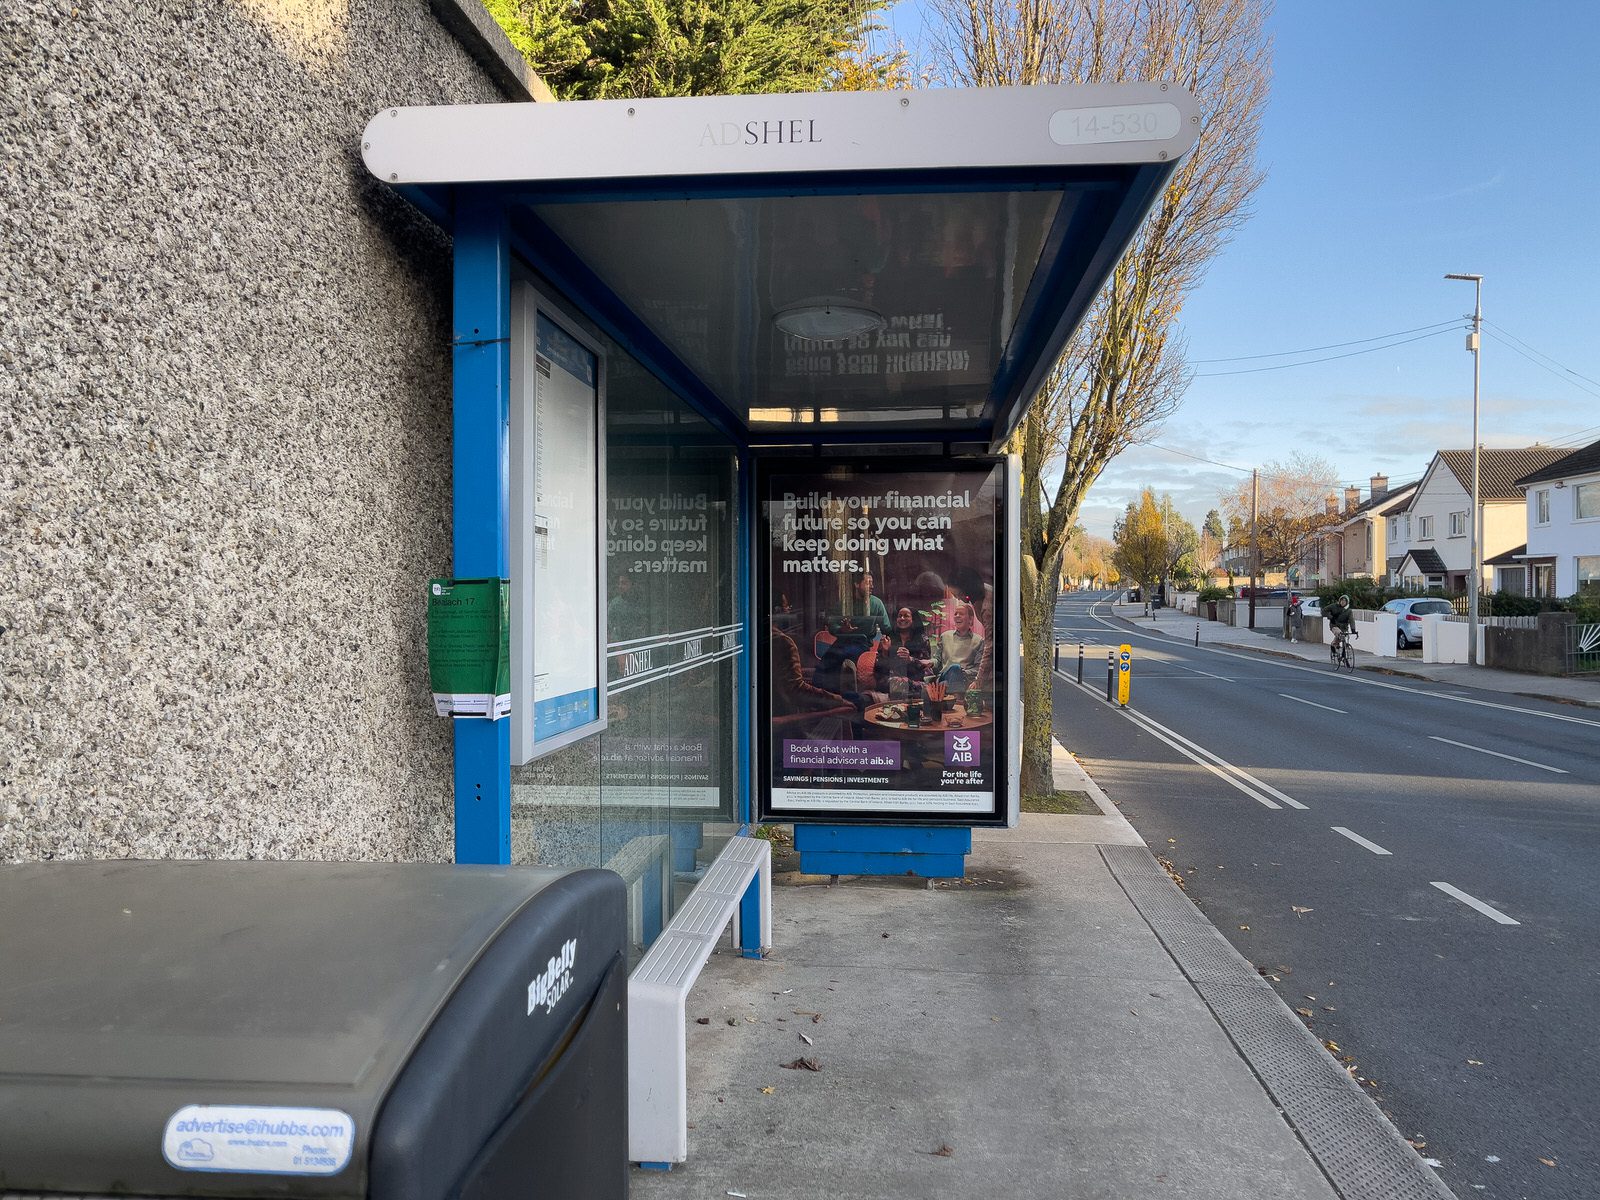 MY FIRST DAY WITHOUT THE 17 BUS SERVICE [WALK FROM S4 BUS STOP IN UCD TO ROEBUCK ROAD]-225600-1